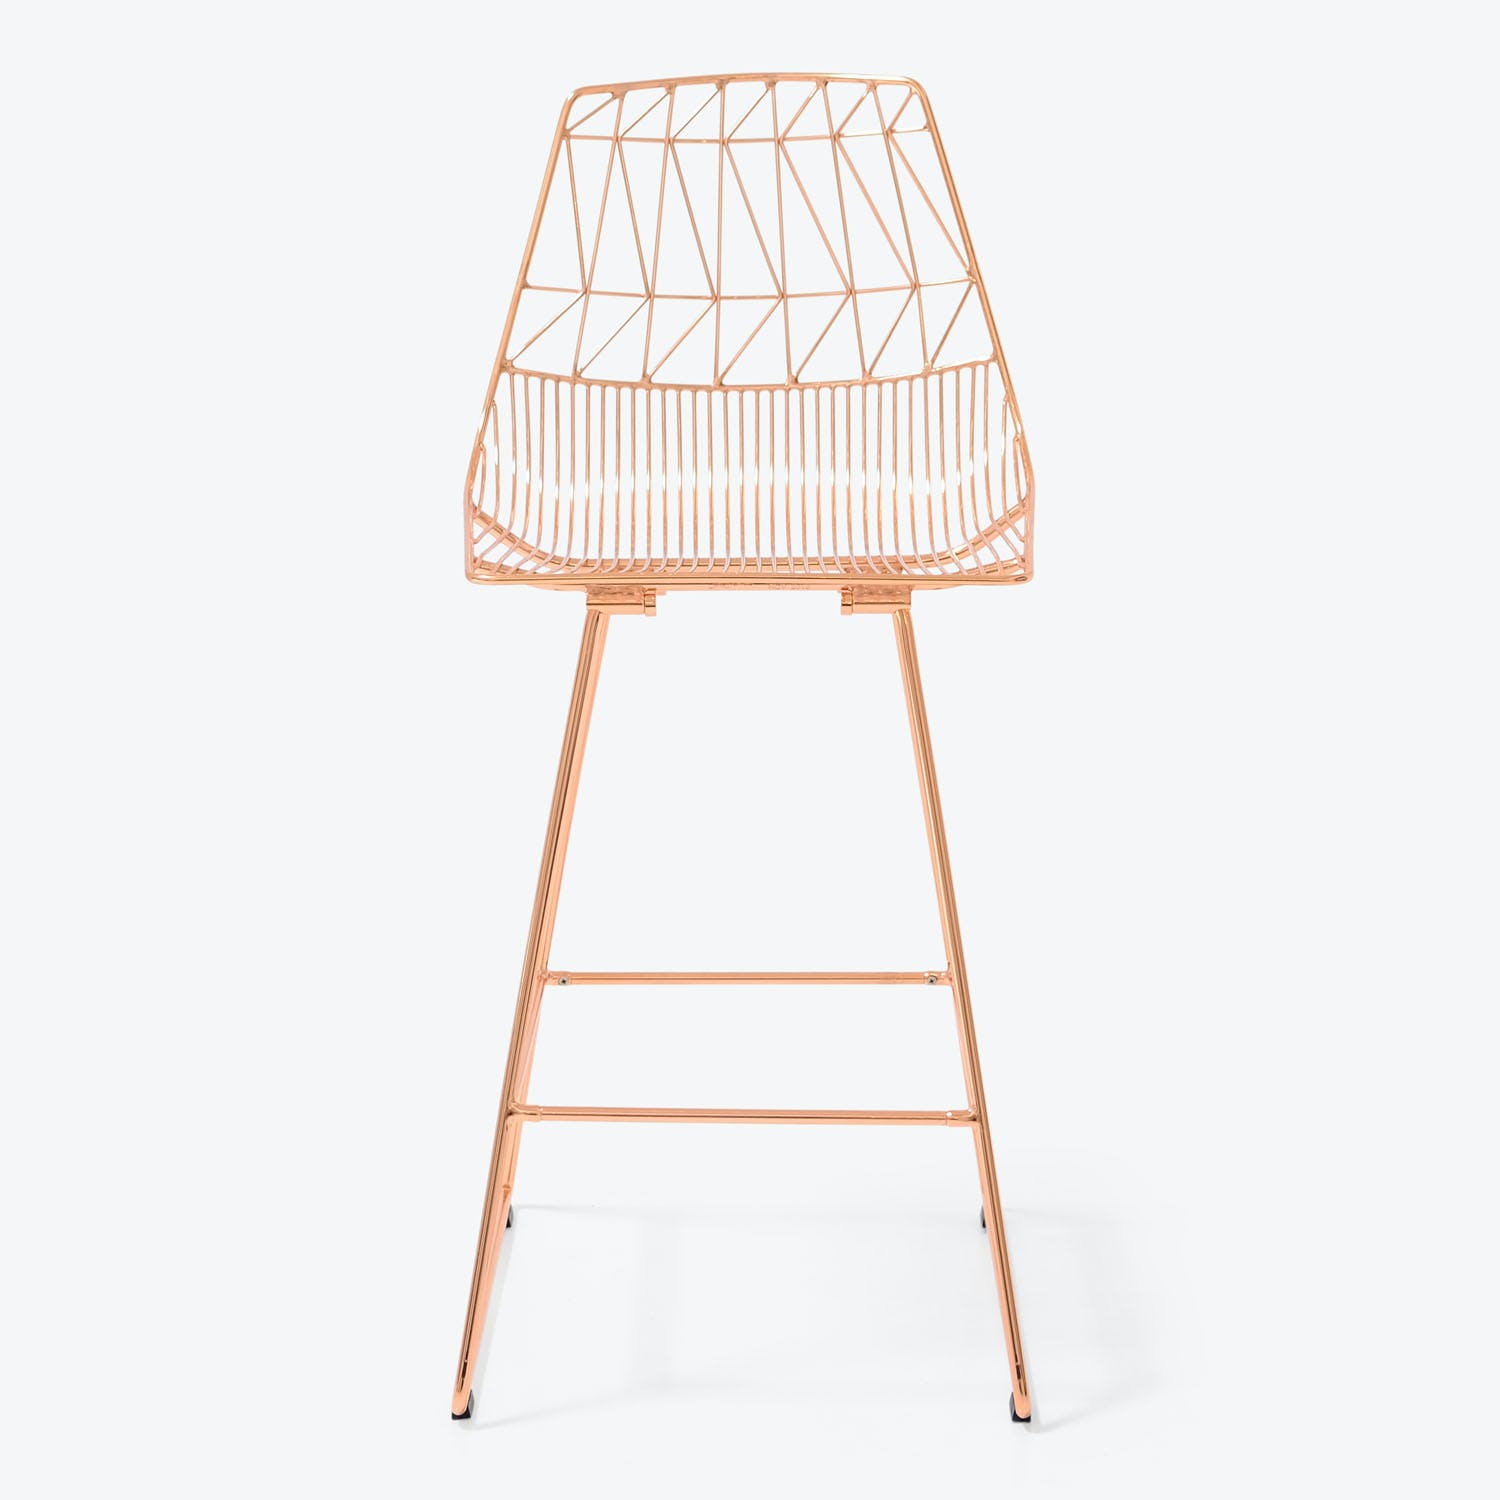 Modern wireframe chair with copper finish exhibits sleek geometric design.